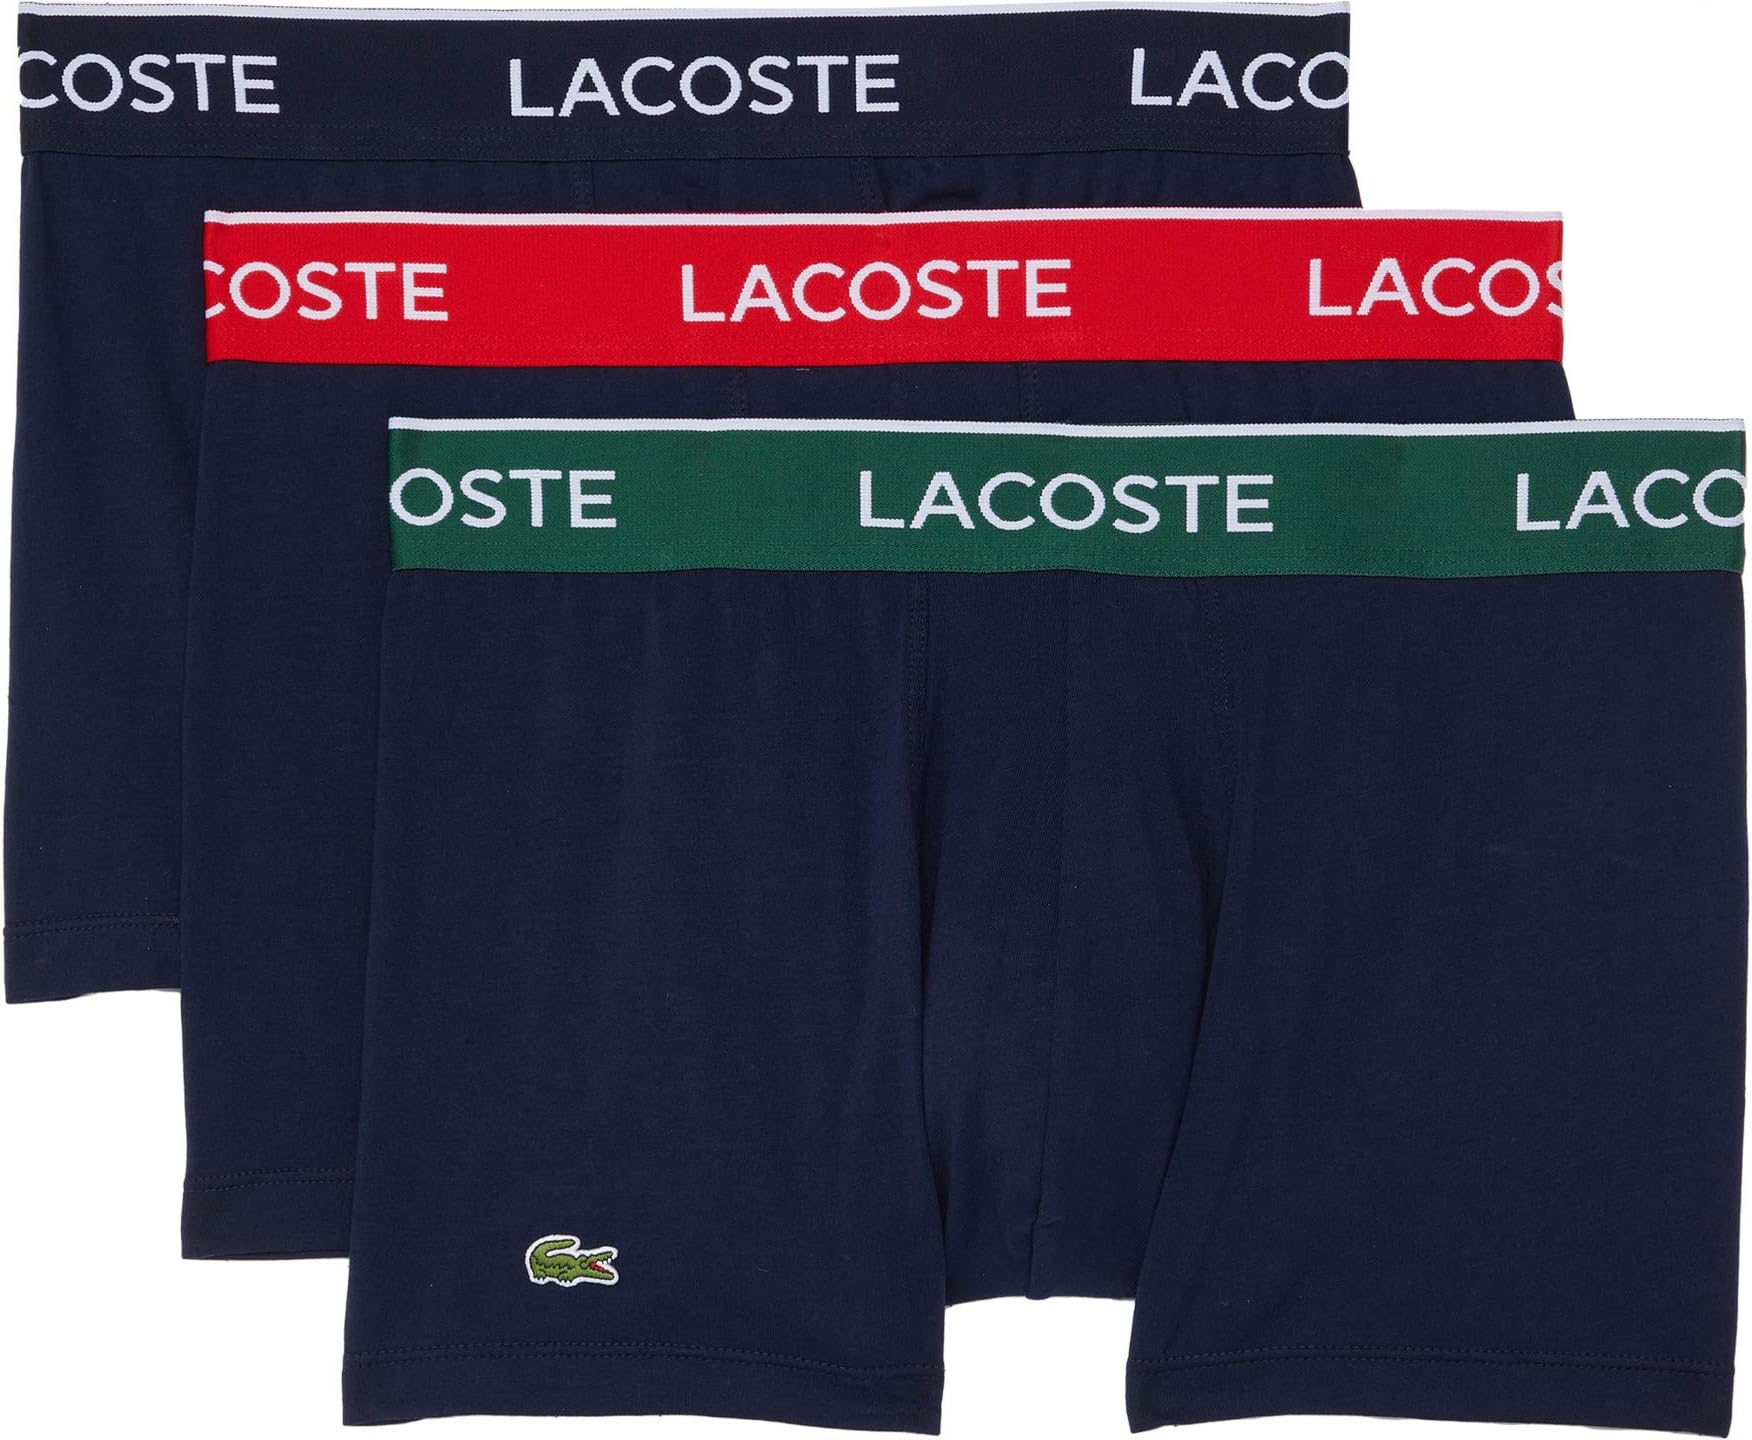 Трусы Trunks 3-Pack Casual Classic Colorful Waistband Lacoste, цвет Navy Blue/Green/Red/Navy Blue 2ml 10ml 25ml pump pipette blue green red laboratory supplies pipettes